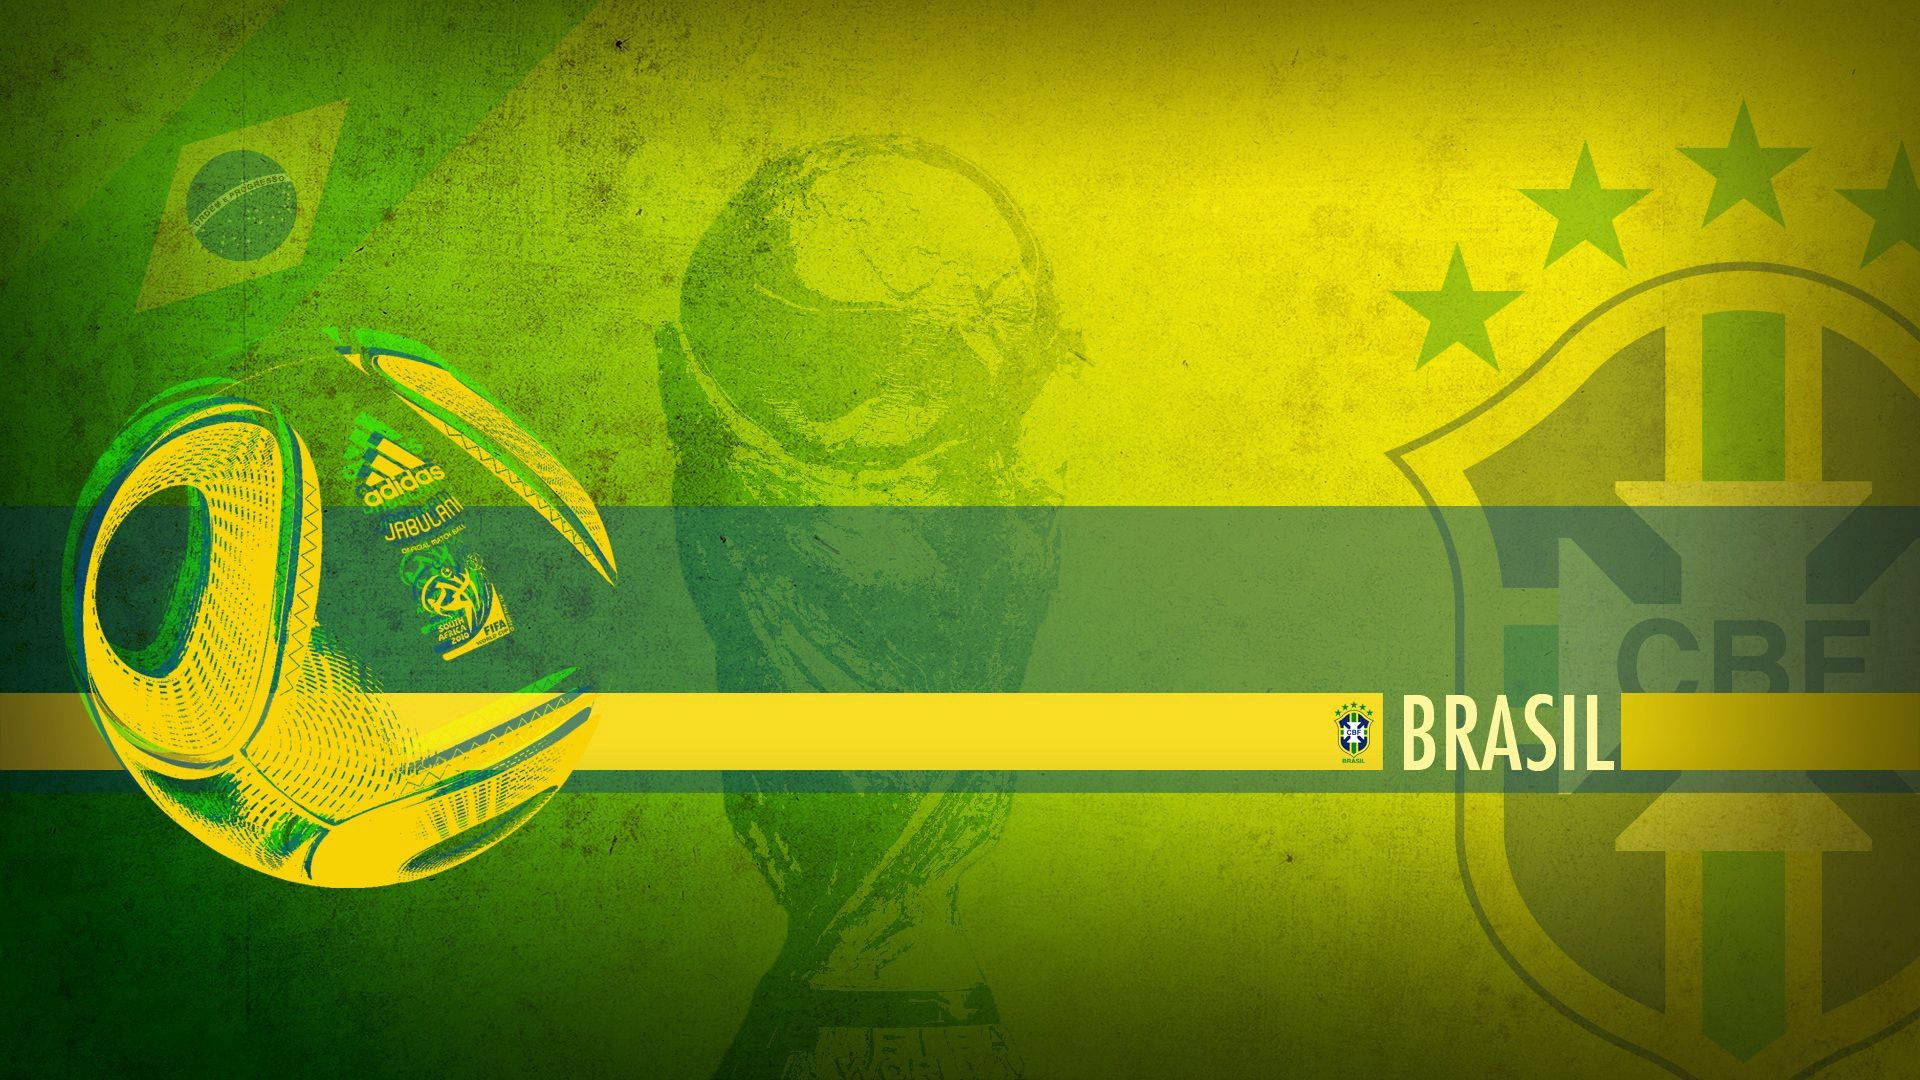 Celebrating The Beauty Of Soccer At The 2014 Fifa World Cup In Brazil Background